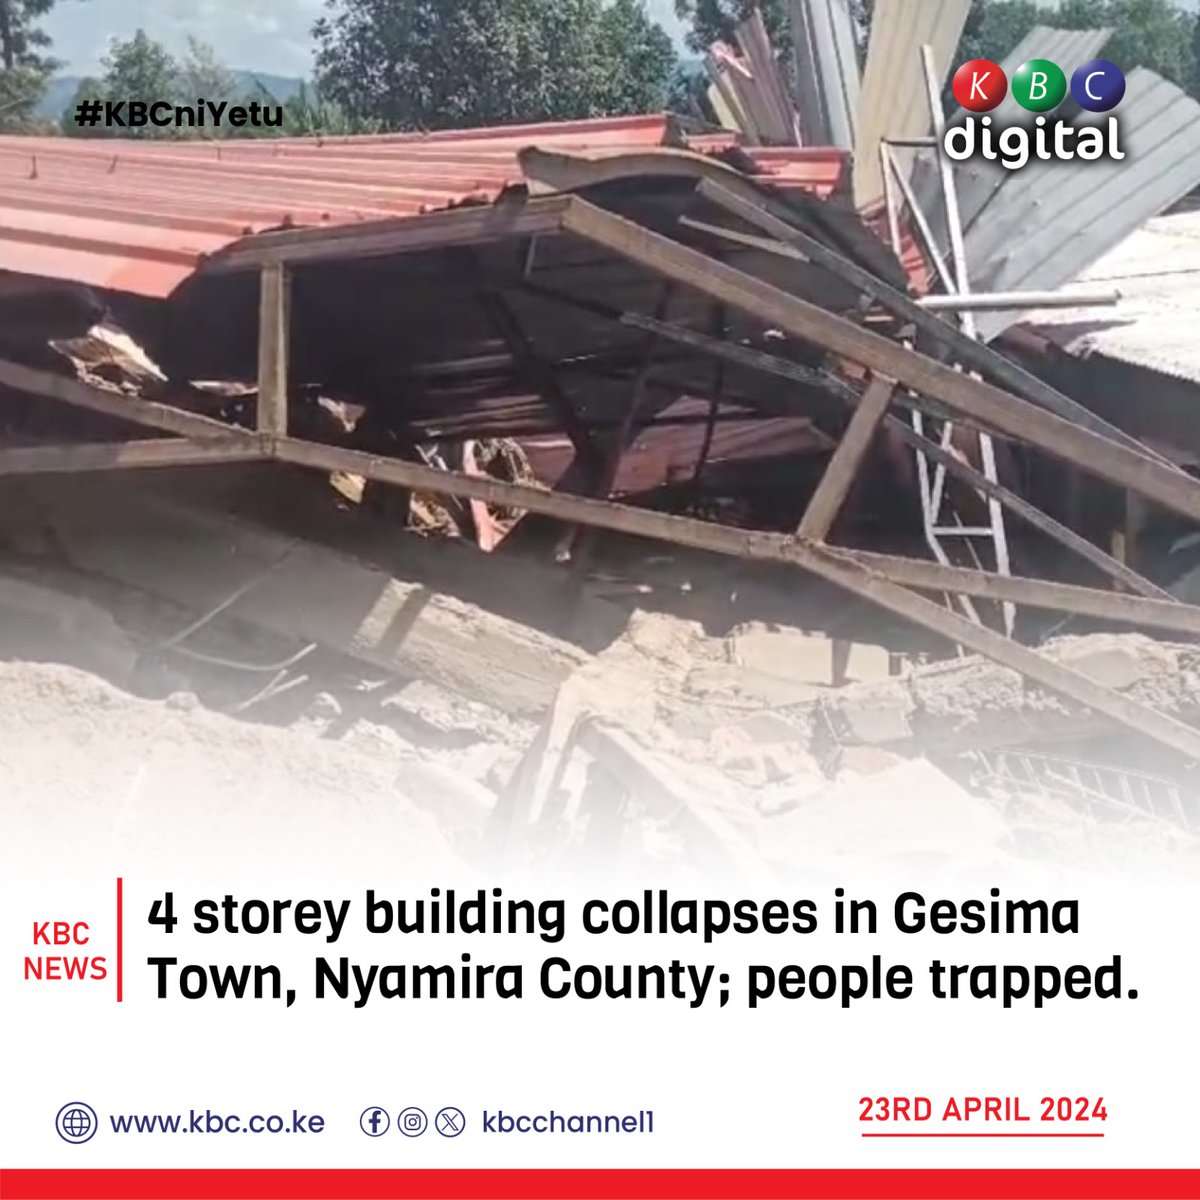 4 storey building collapses in Gesima Town, Nyamira County; people trapped. #KBCniYetu ^RO